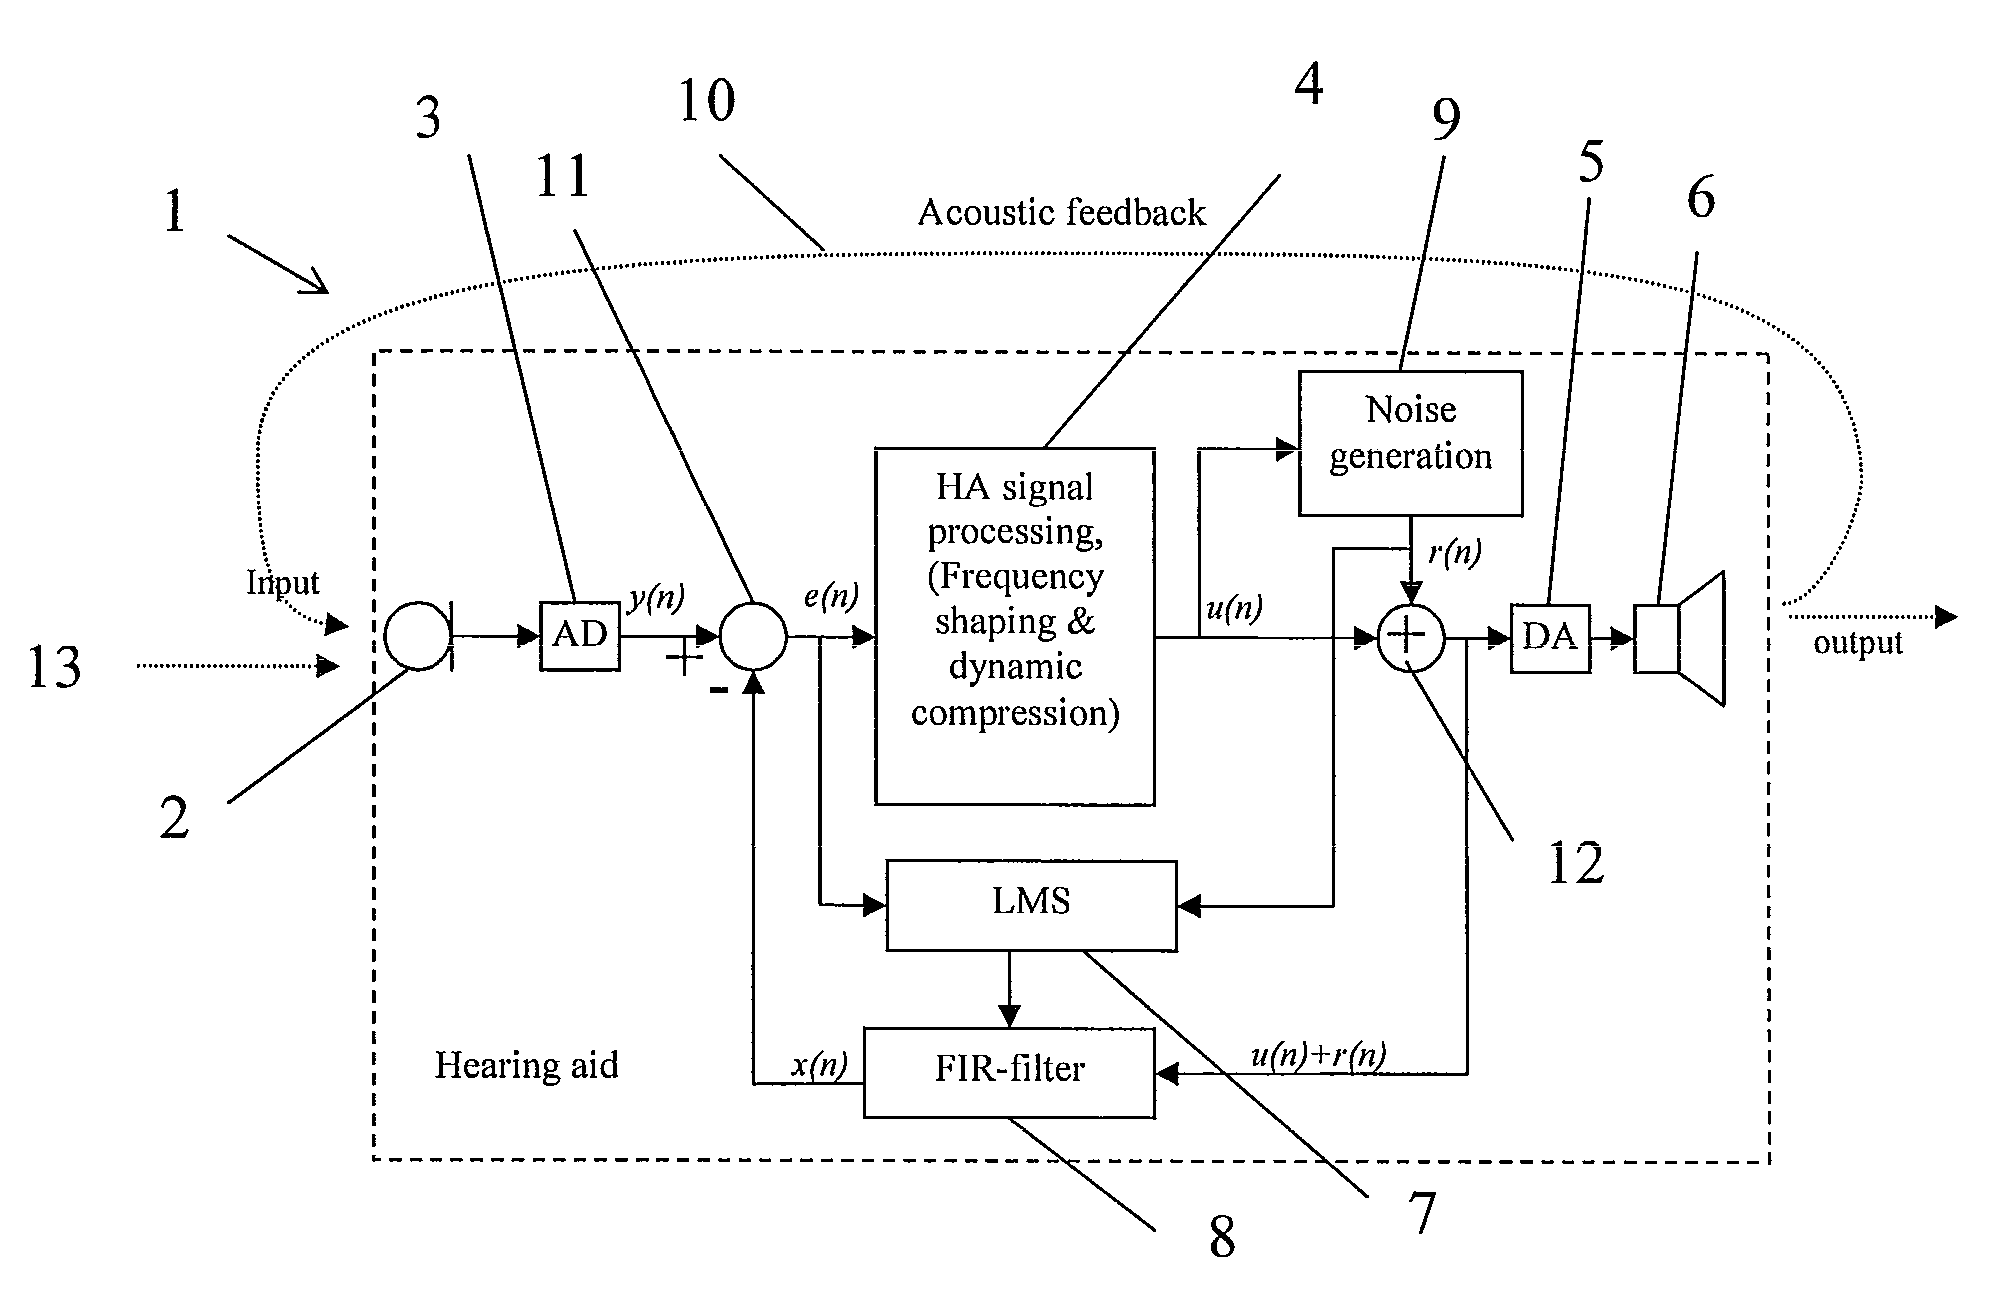 Generation of probe noise in a feedback cancellation system